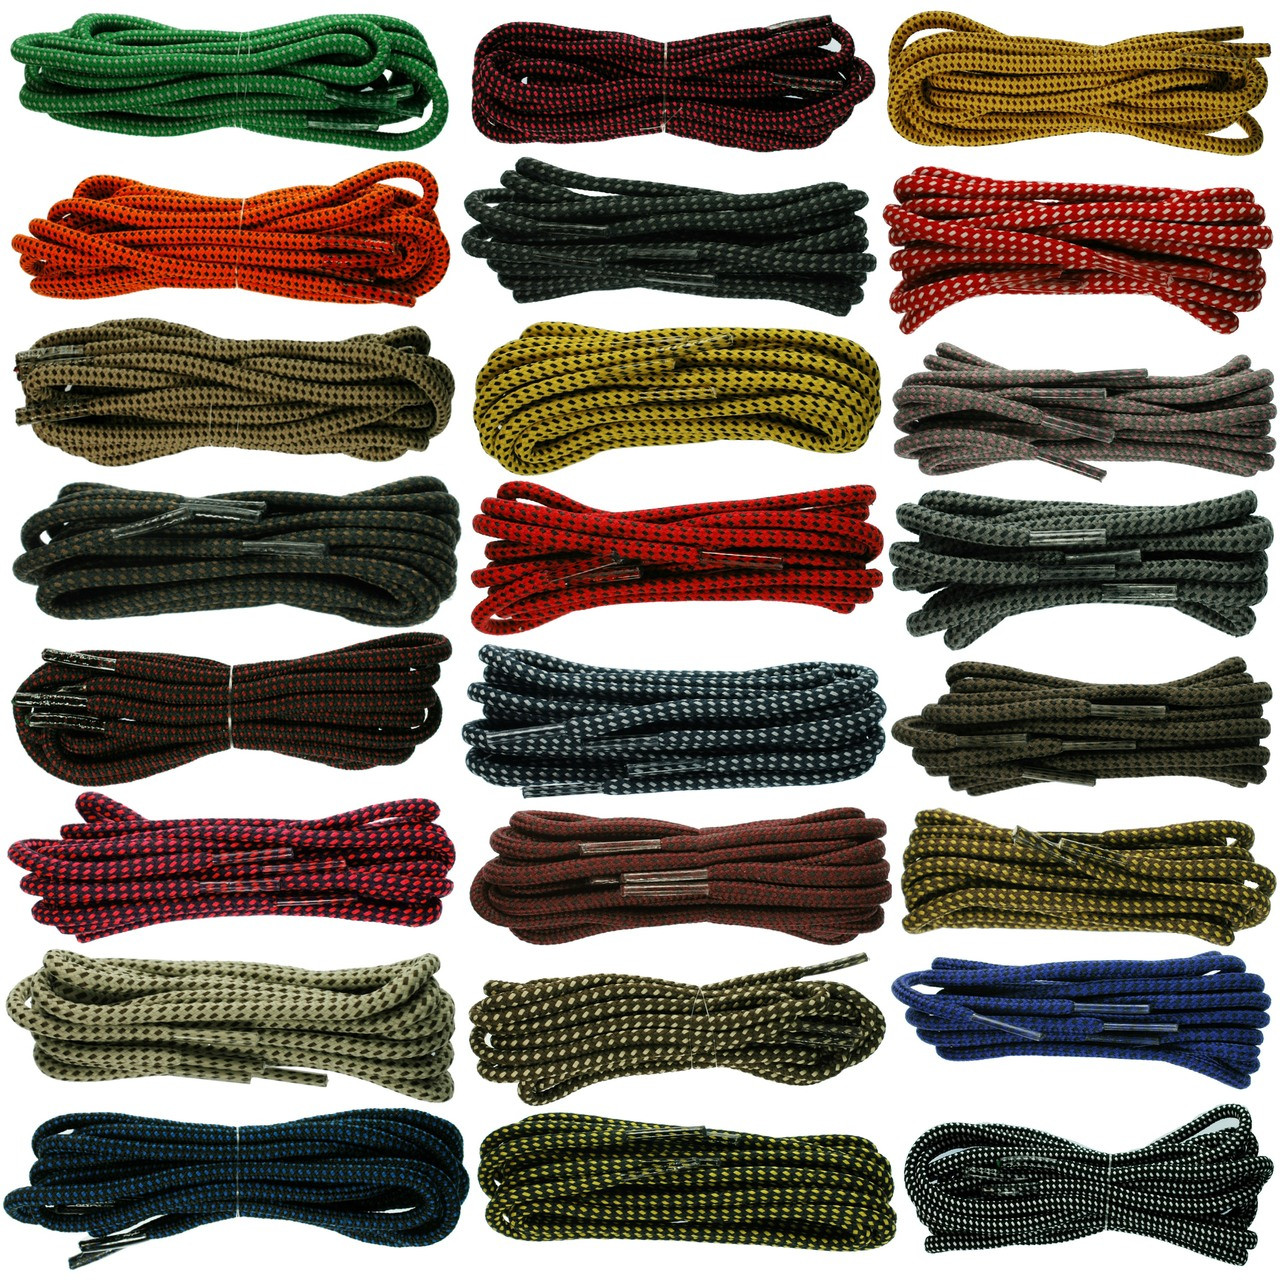 hiking shoelaces Black & Grey  Berghaus Check chose from 14 different lengths 